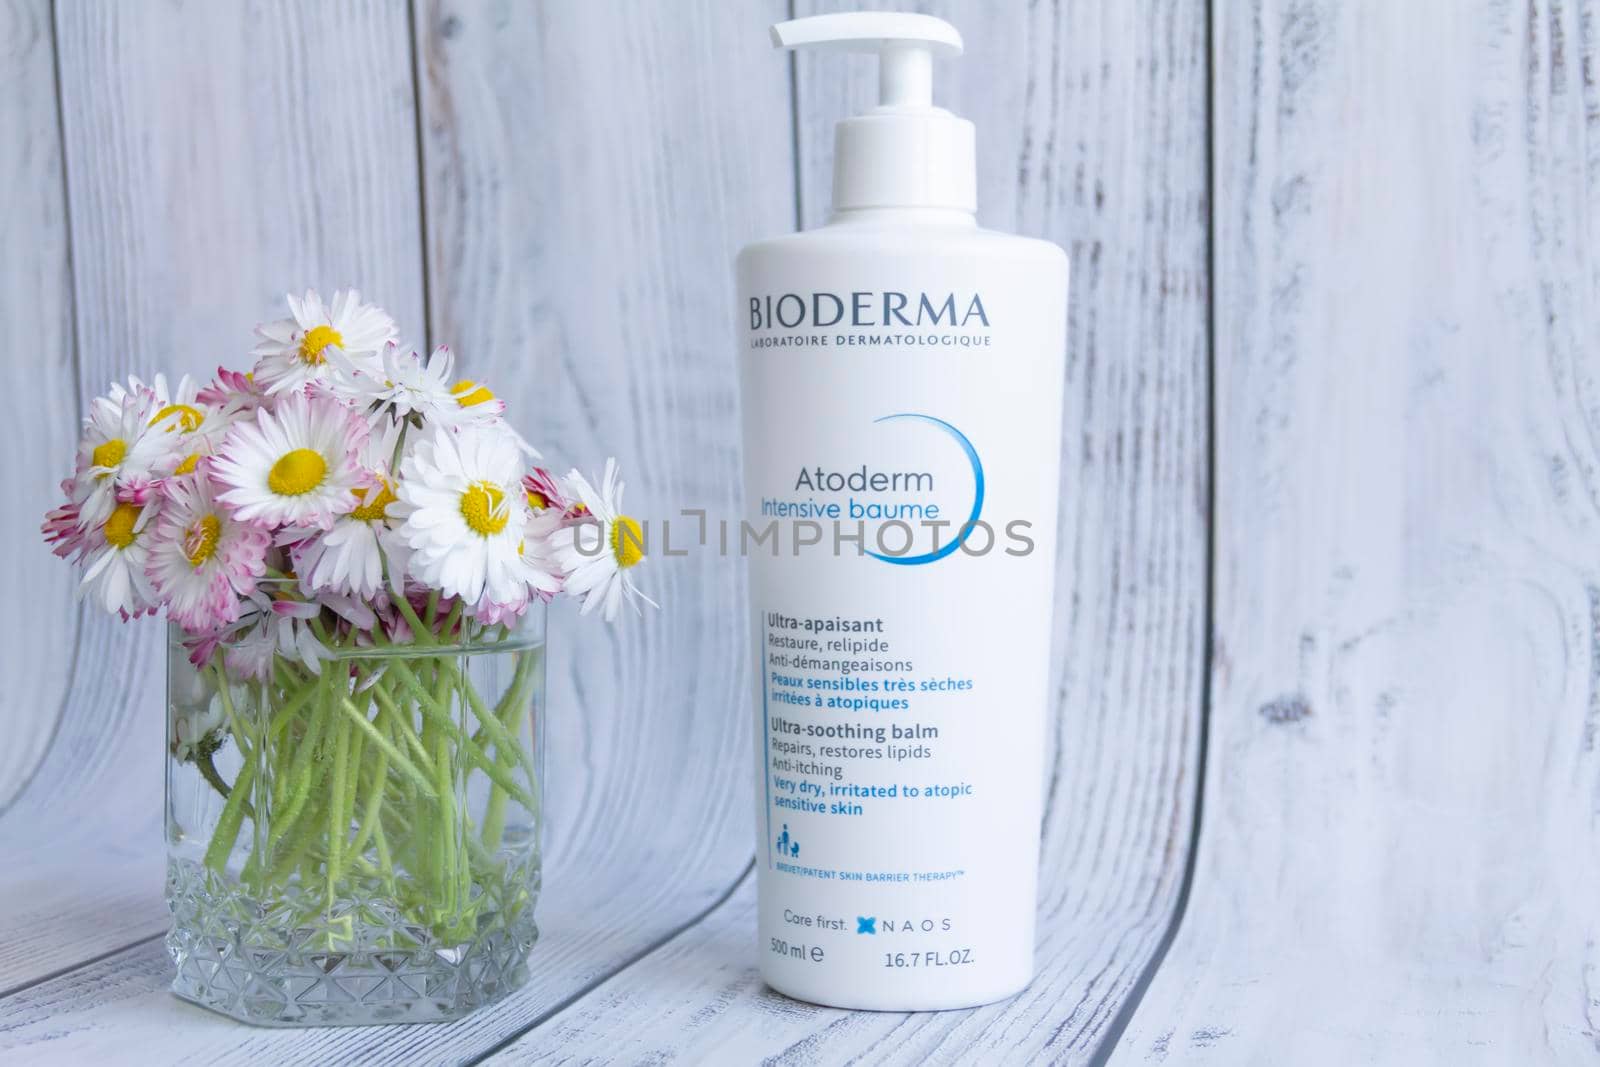 Bioderma dry skin care balm with a bouquet of white daisies on a wooden background. Cosmetic products.